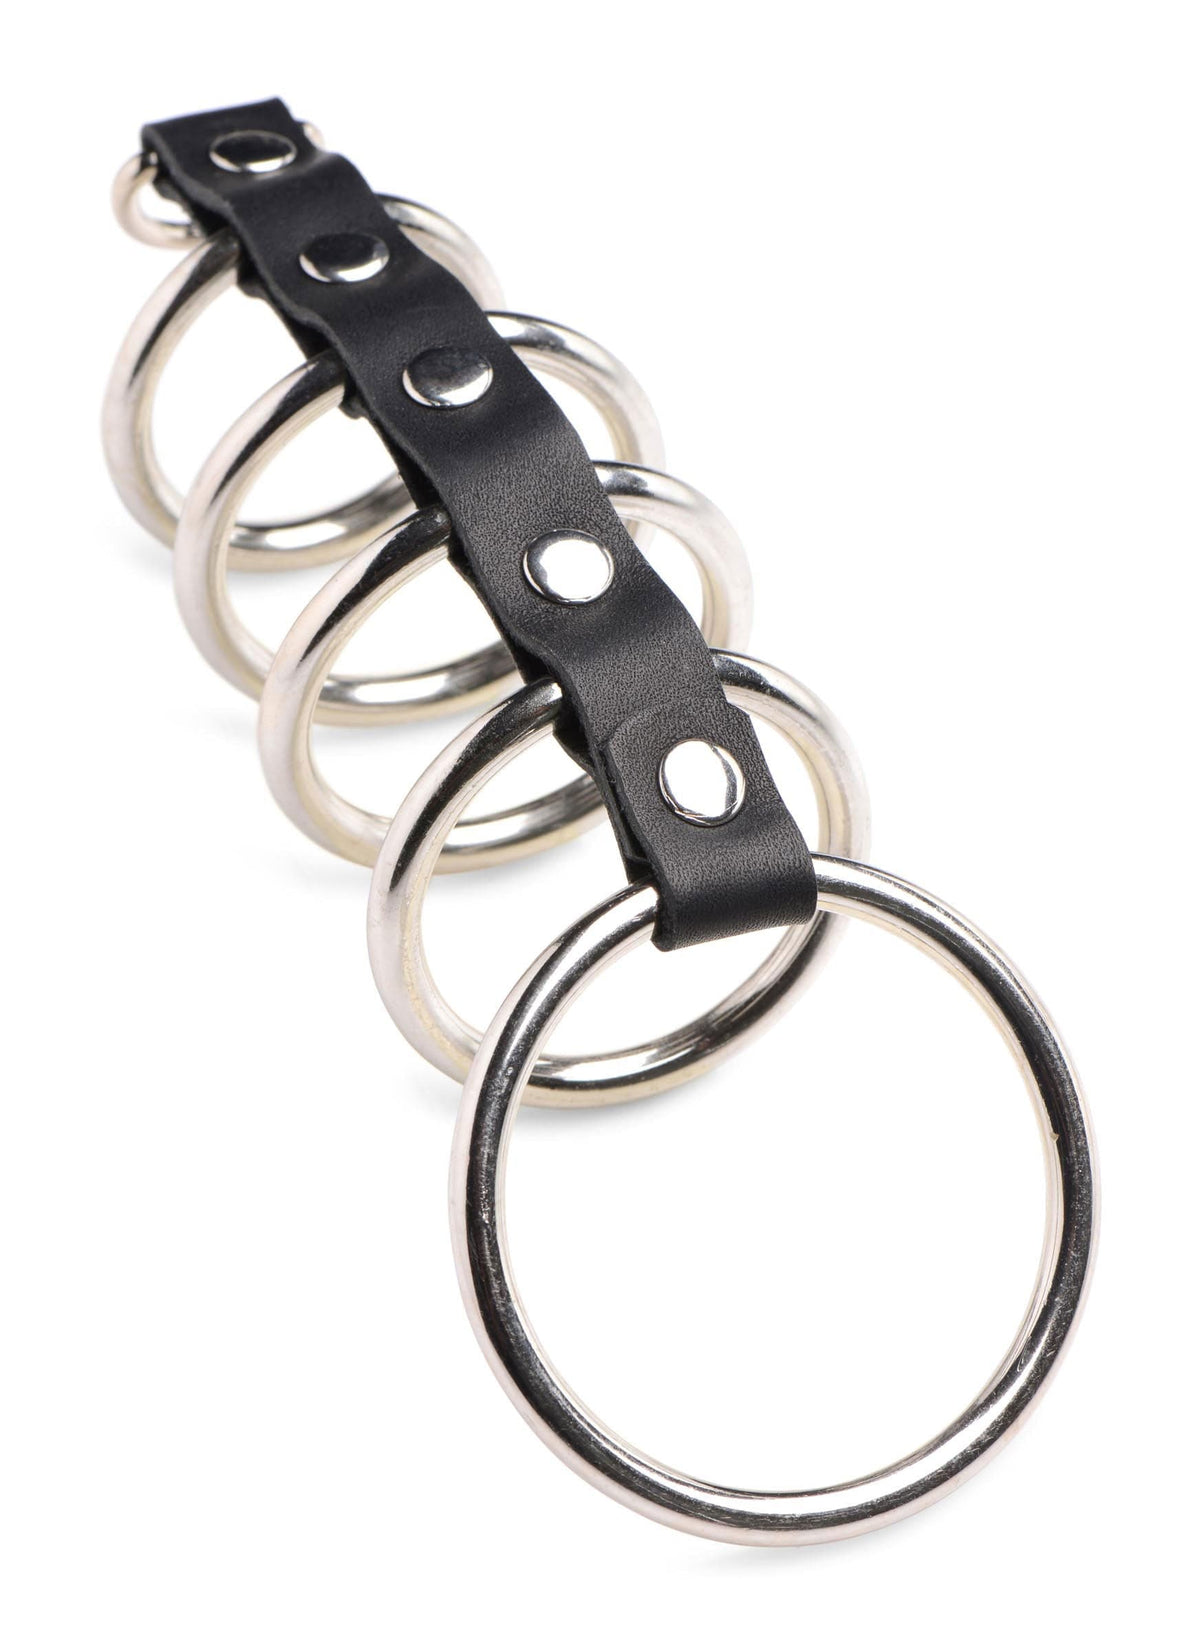 cock gear gates of hell chastity device black